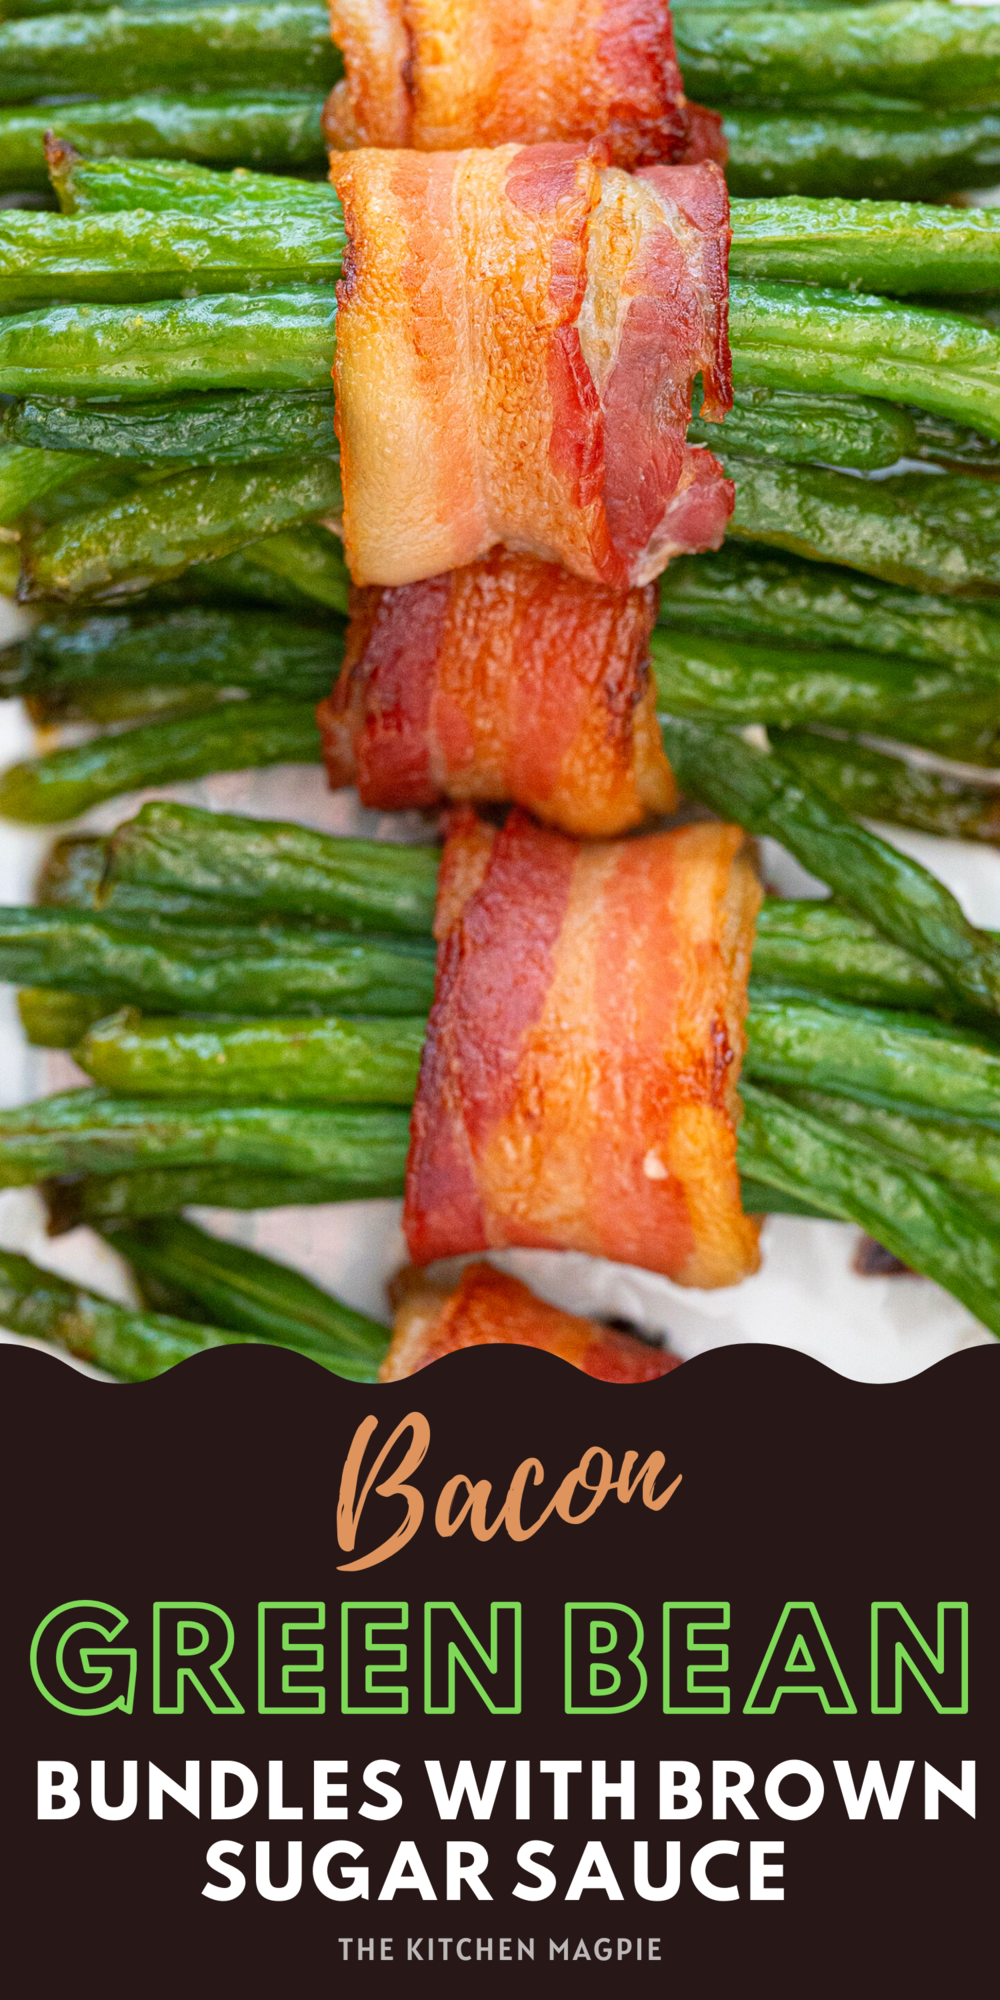 These bacon wrapped green bean bundles are the ultimate, surprise appetizer for a party, people will be amazed at these little creative bundles of sweet, smoky bacon, green bean goodness!